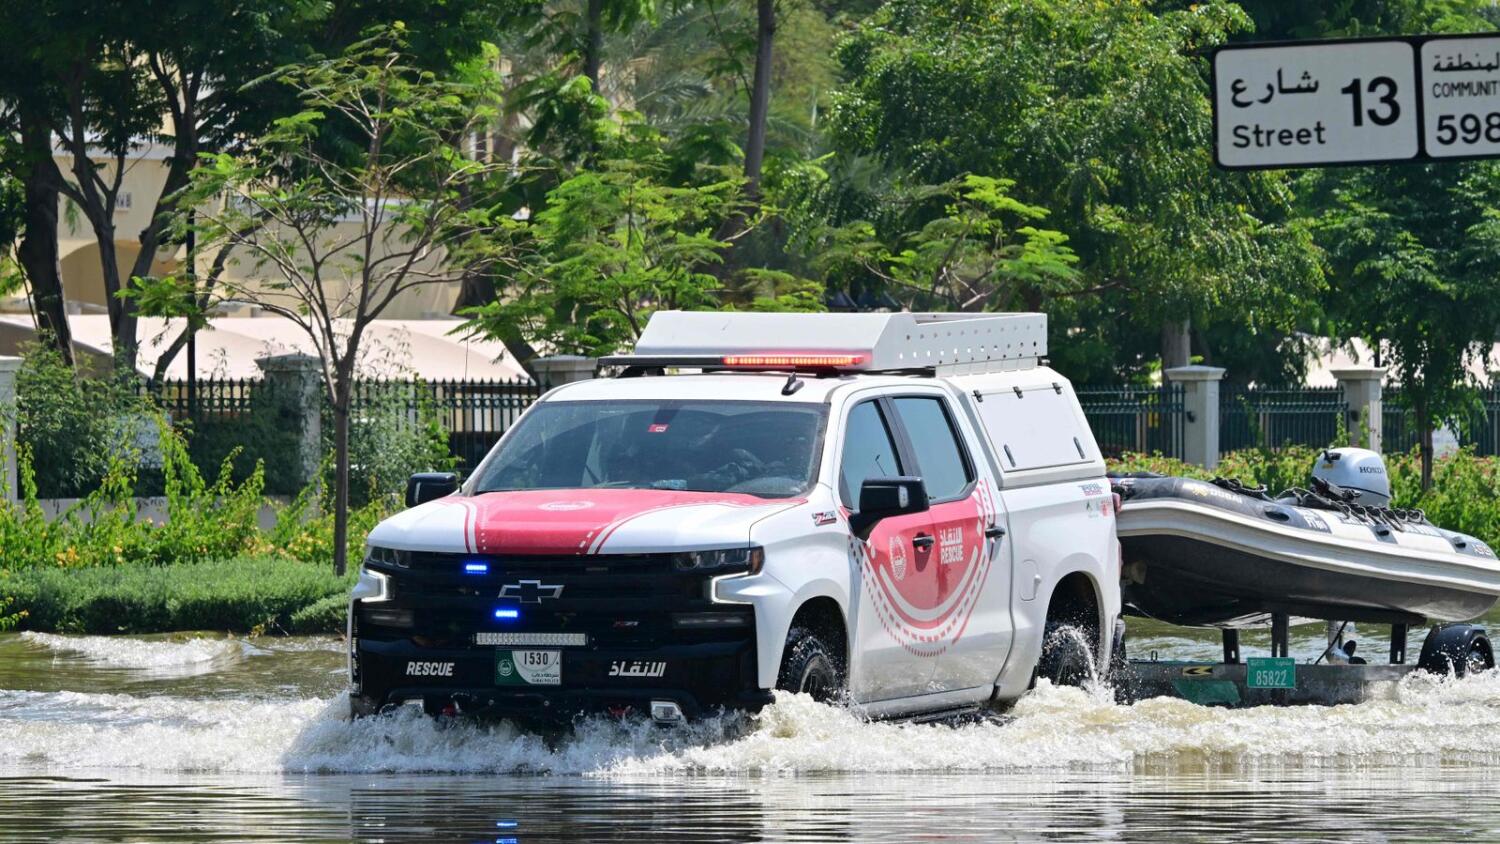 A Dubai Police car pulls a speed boat in a flooded street following heavy rains. Photo: AFP file